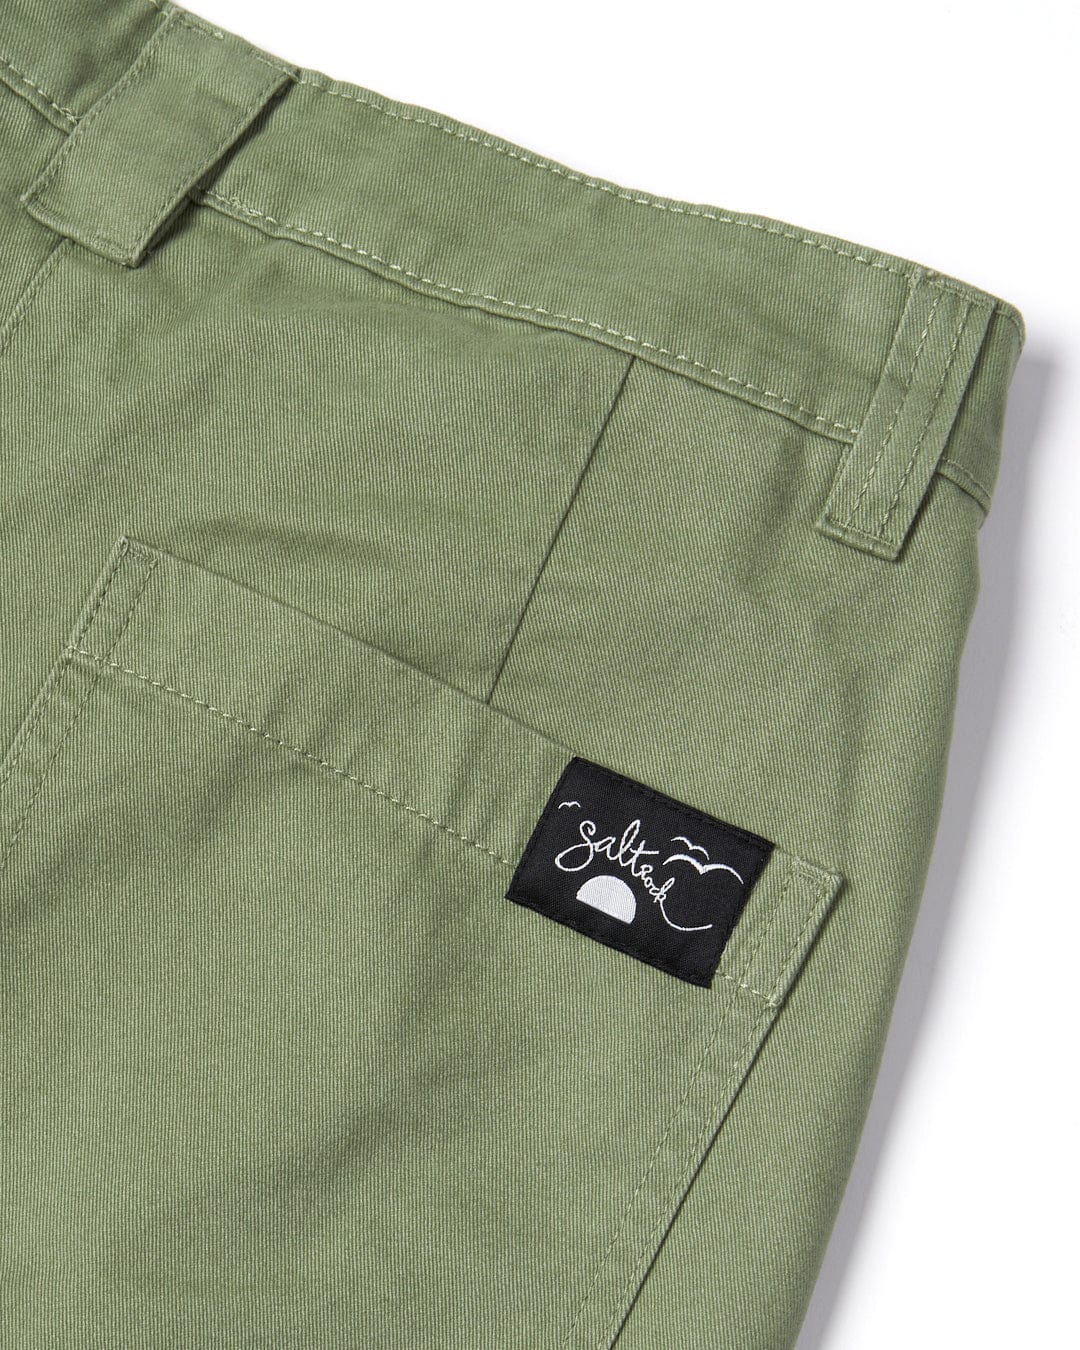 Olive green Liesl - Womens Chino Short - Green trousers with a Saltrock woven label on the back pocket.